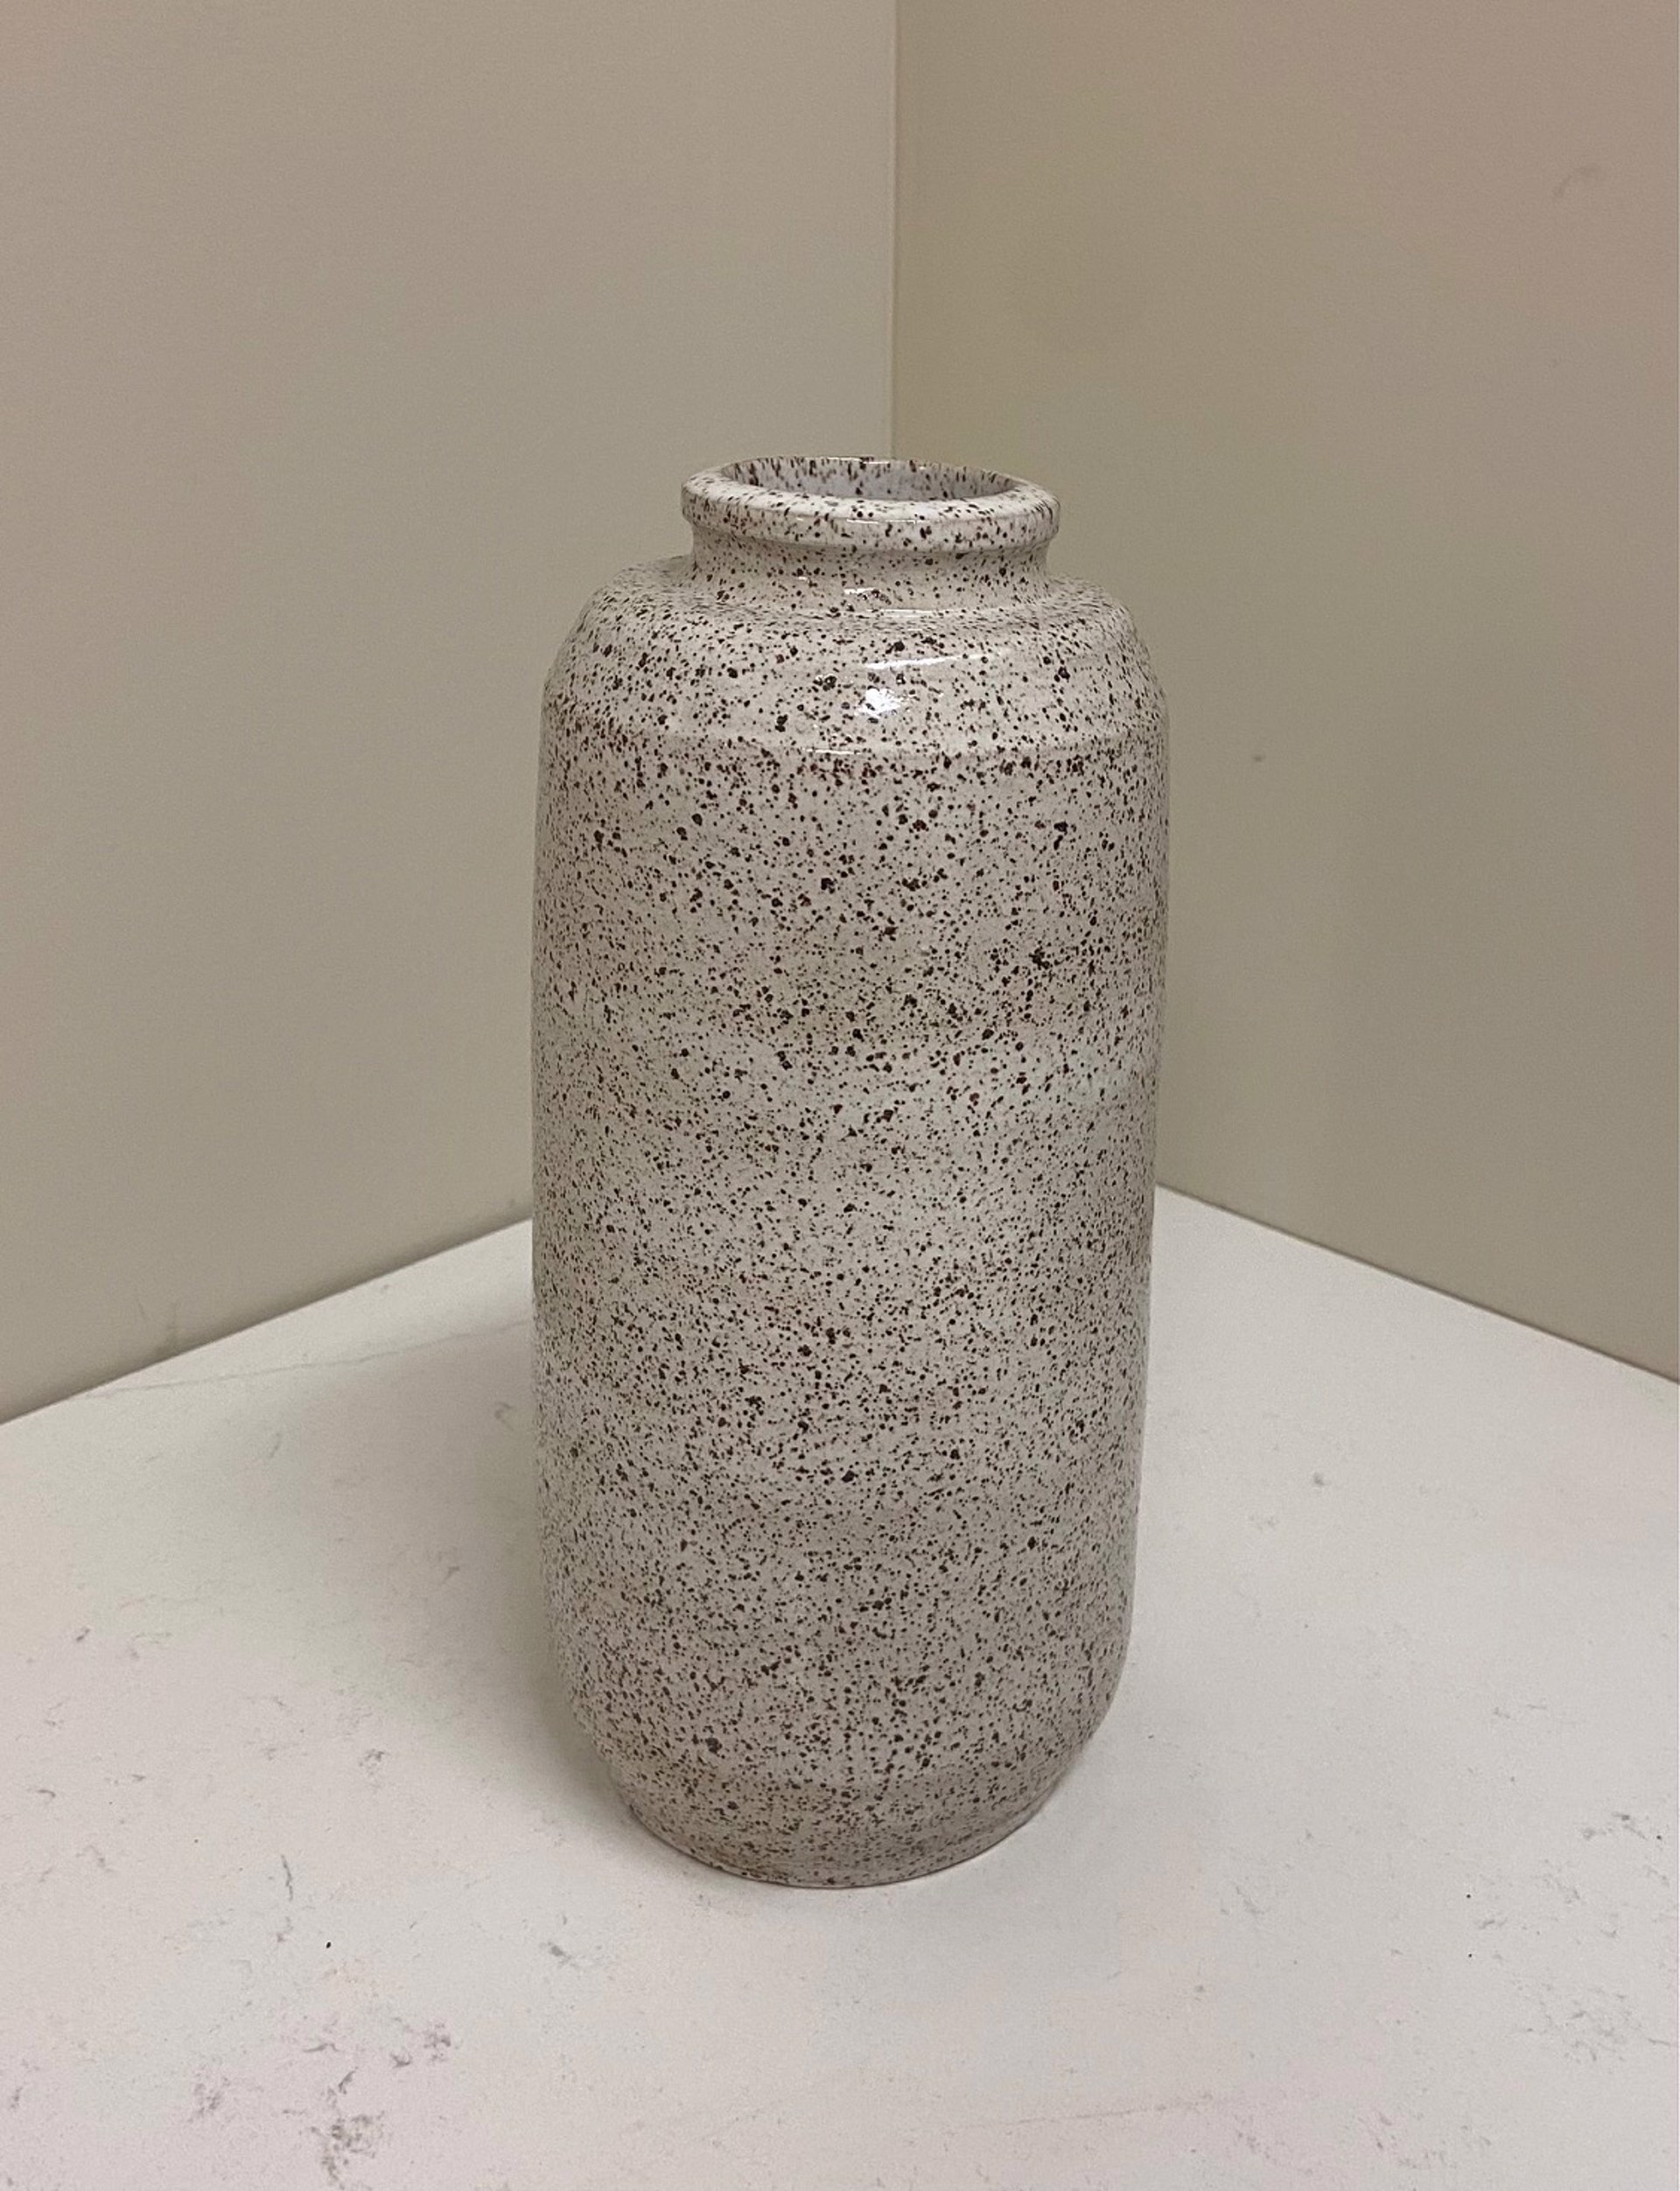 Speckled Snow Vase by Frankie Williams